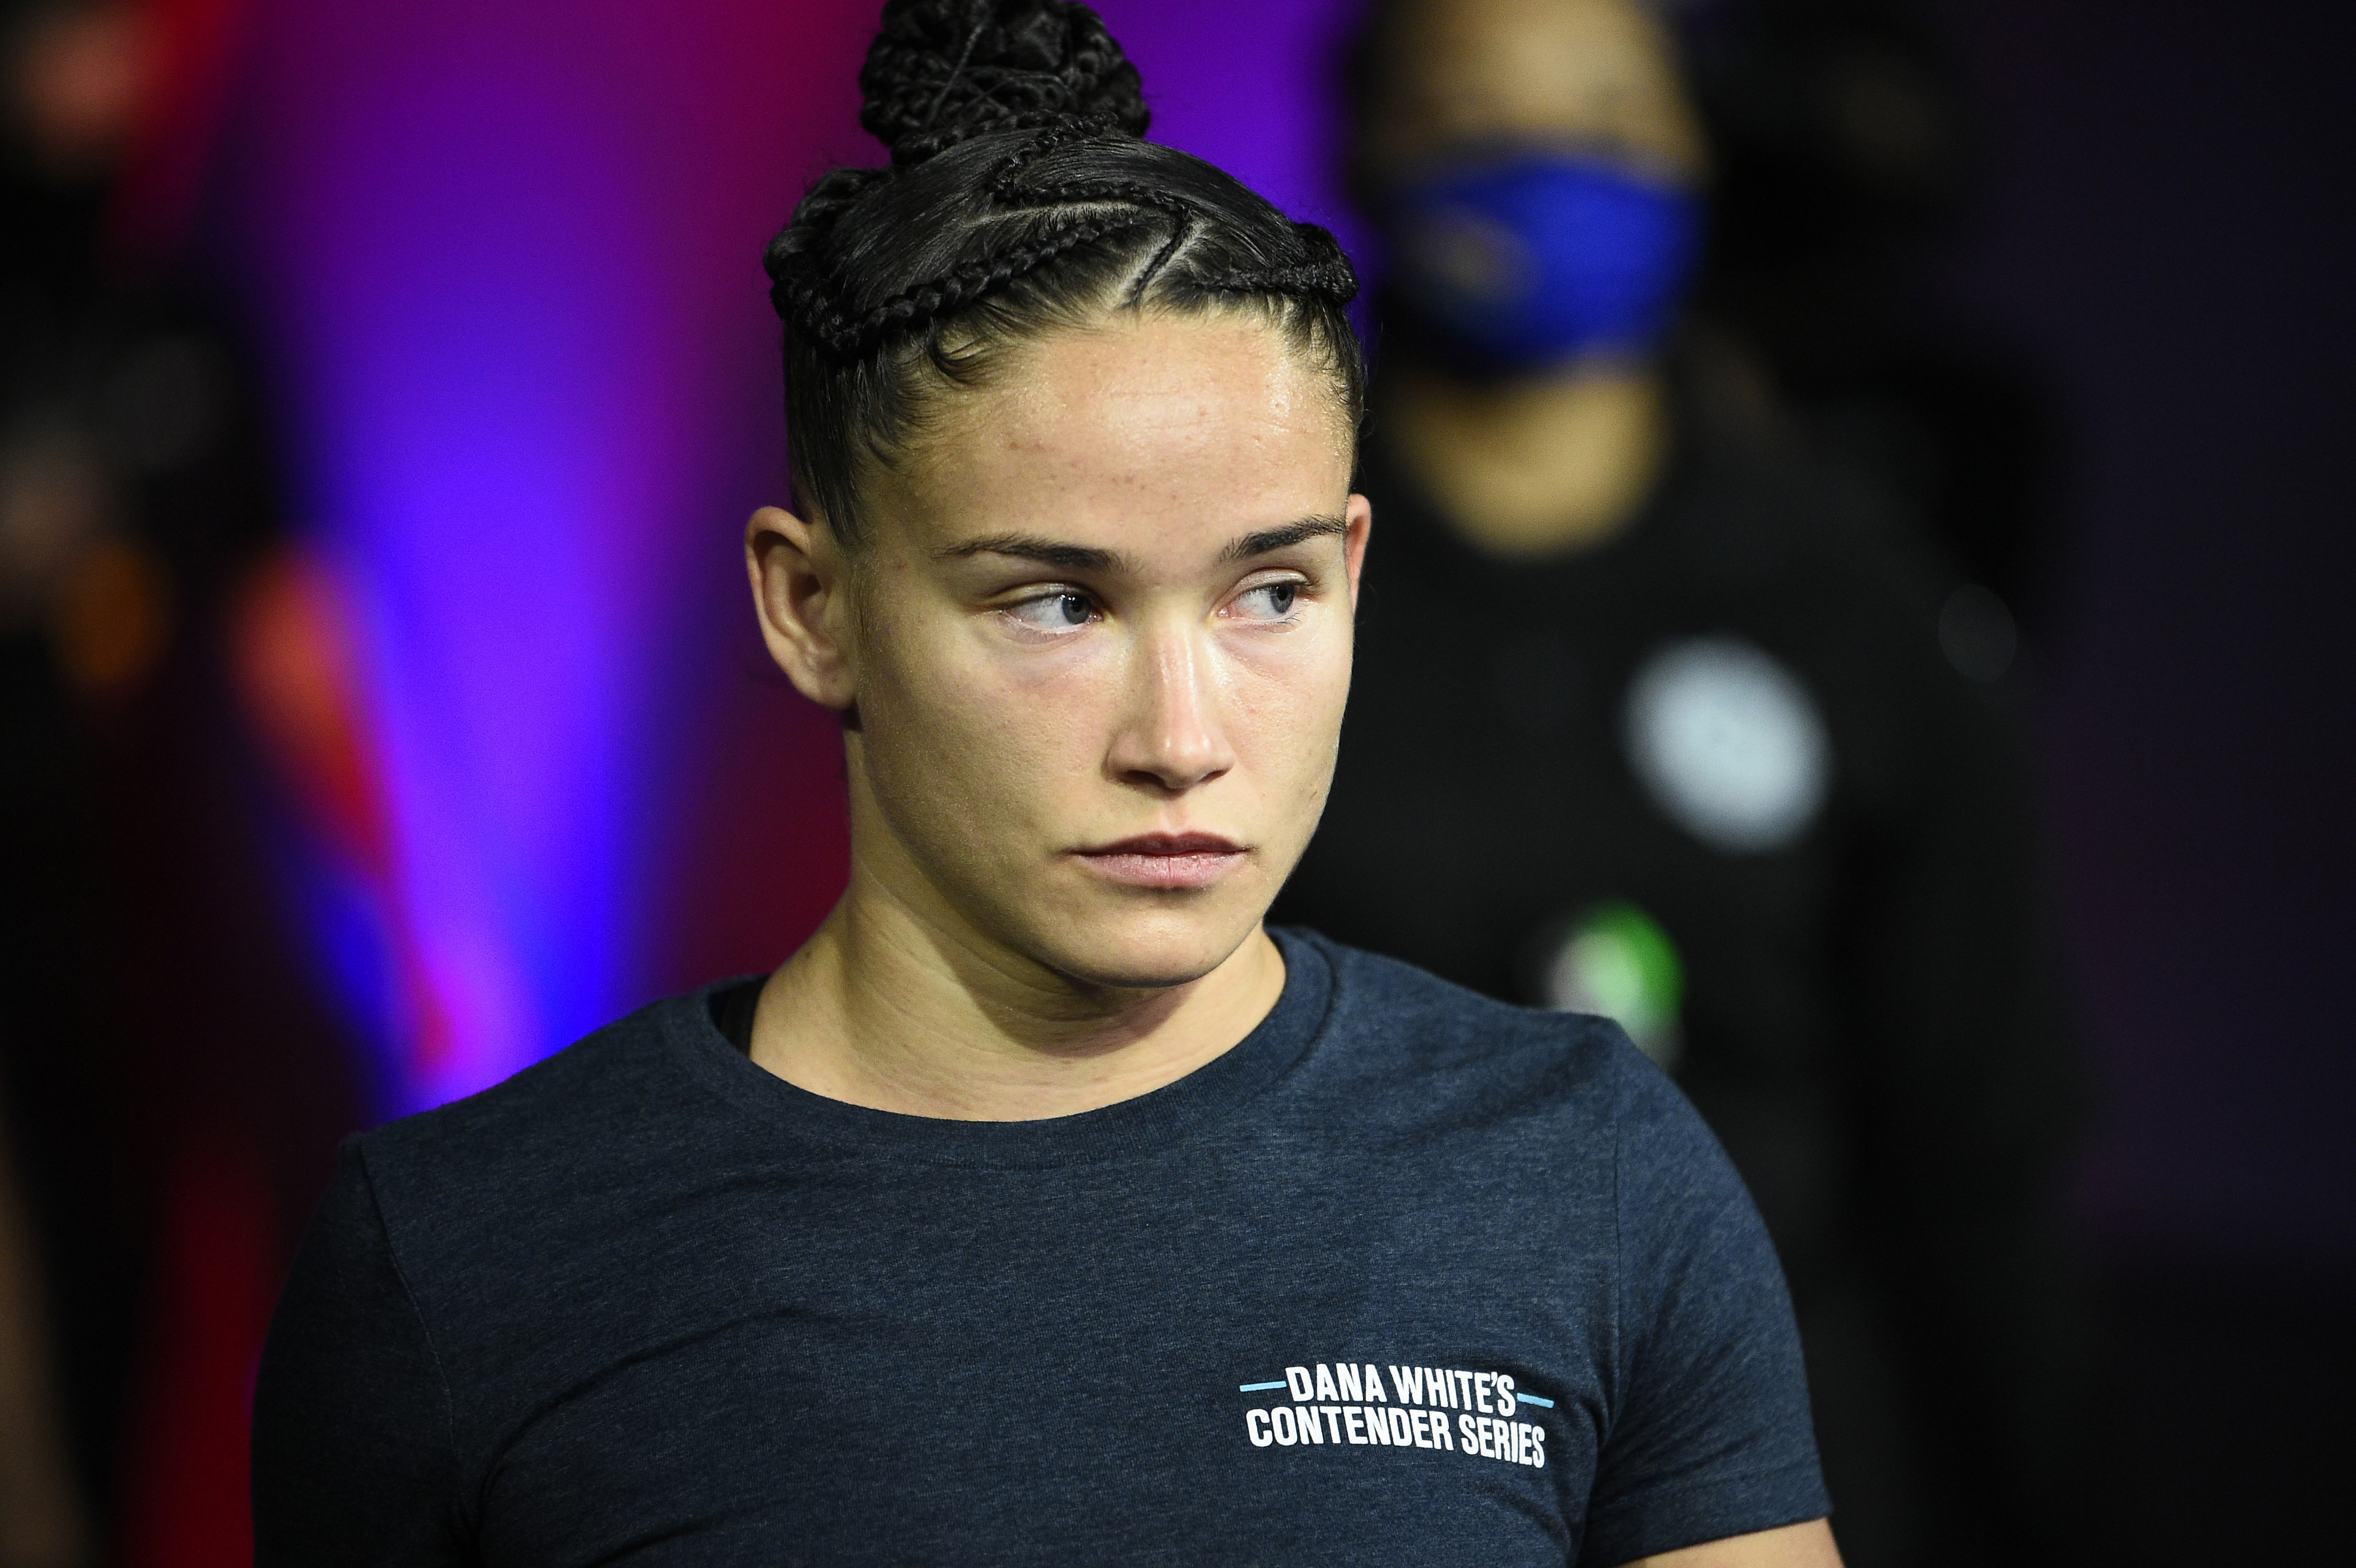 🚨𝗕𝗥𝗘𝗔𝗞𝗜𝗡𝗚 𝗡𝗘𝗪𝗦 🚨 Welcome to the Professional Fighters League  @serranosisters “The Real Deal” is signed and set to fight in the PFL's  PPV…